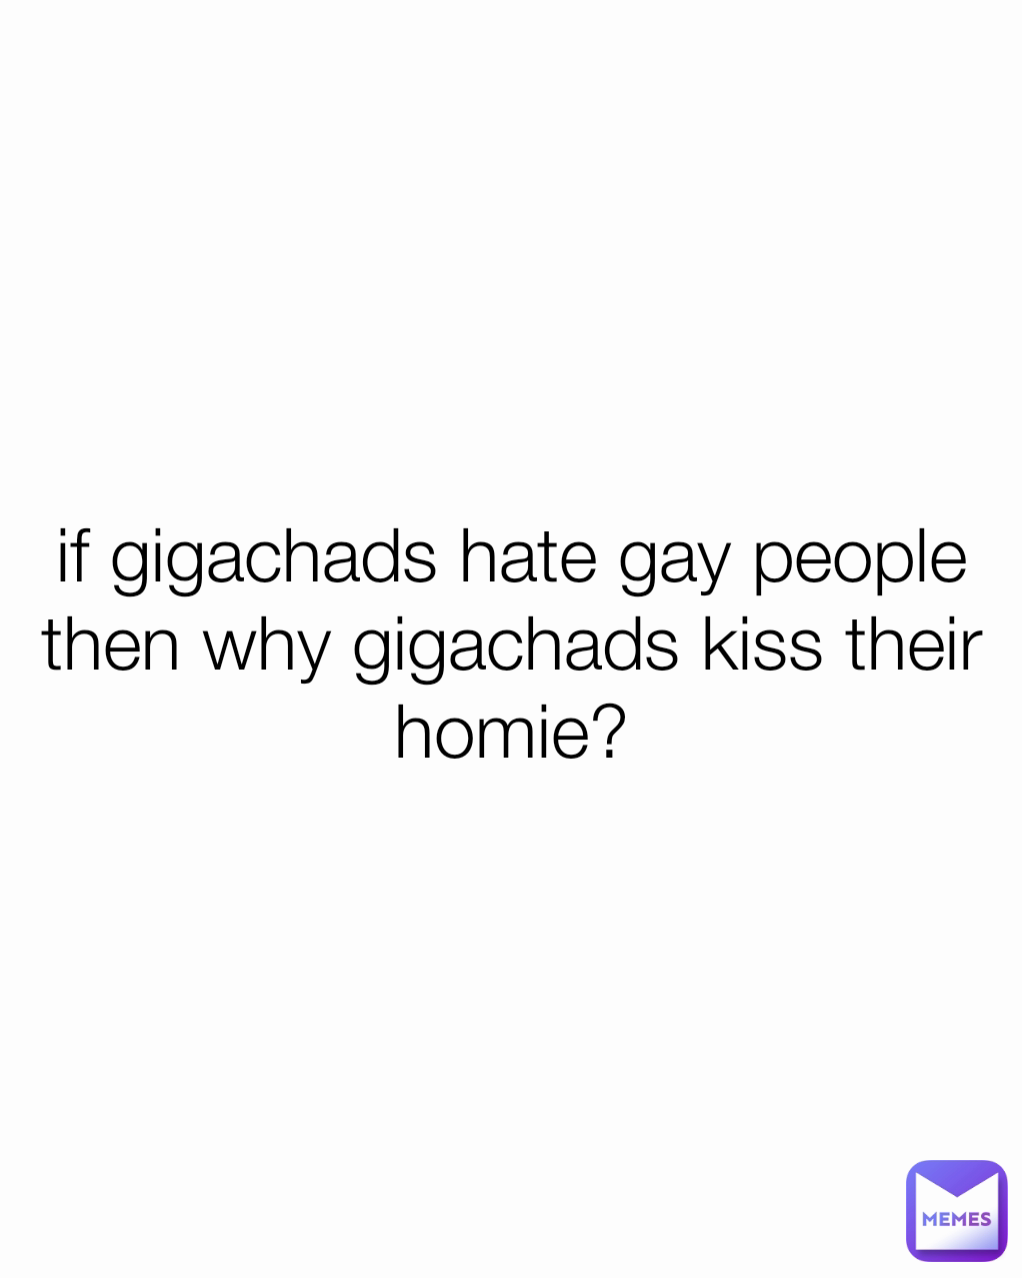 if gigachads hate gay people then why gigachads kiss their homie?